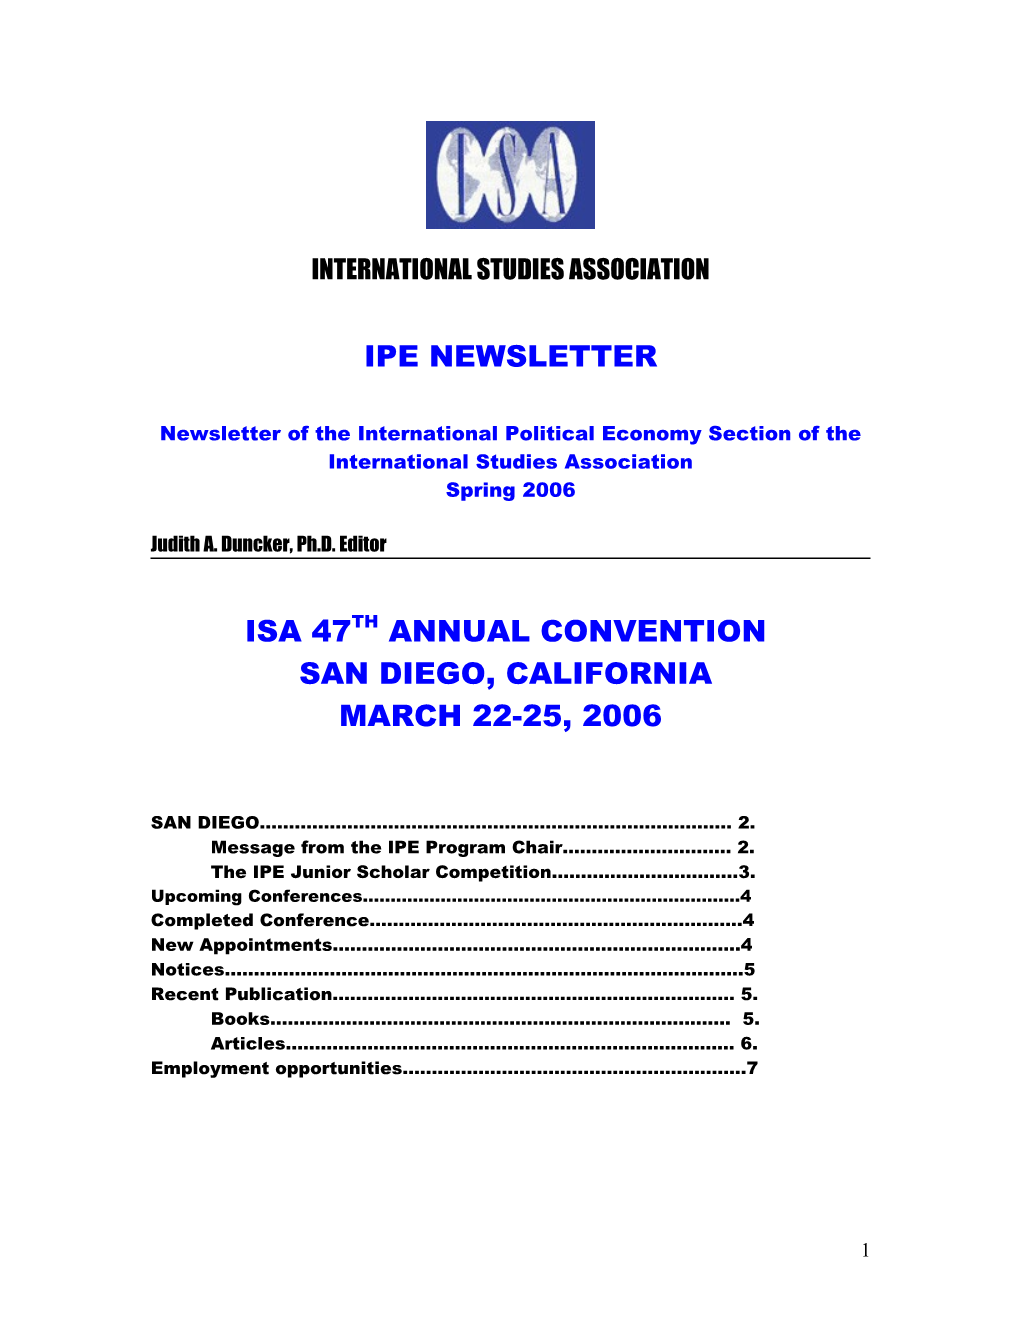 Newsletter of the International Political Economy Section of the International Studies